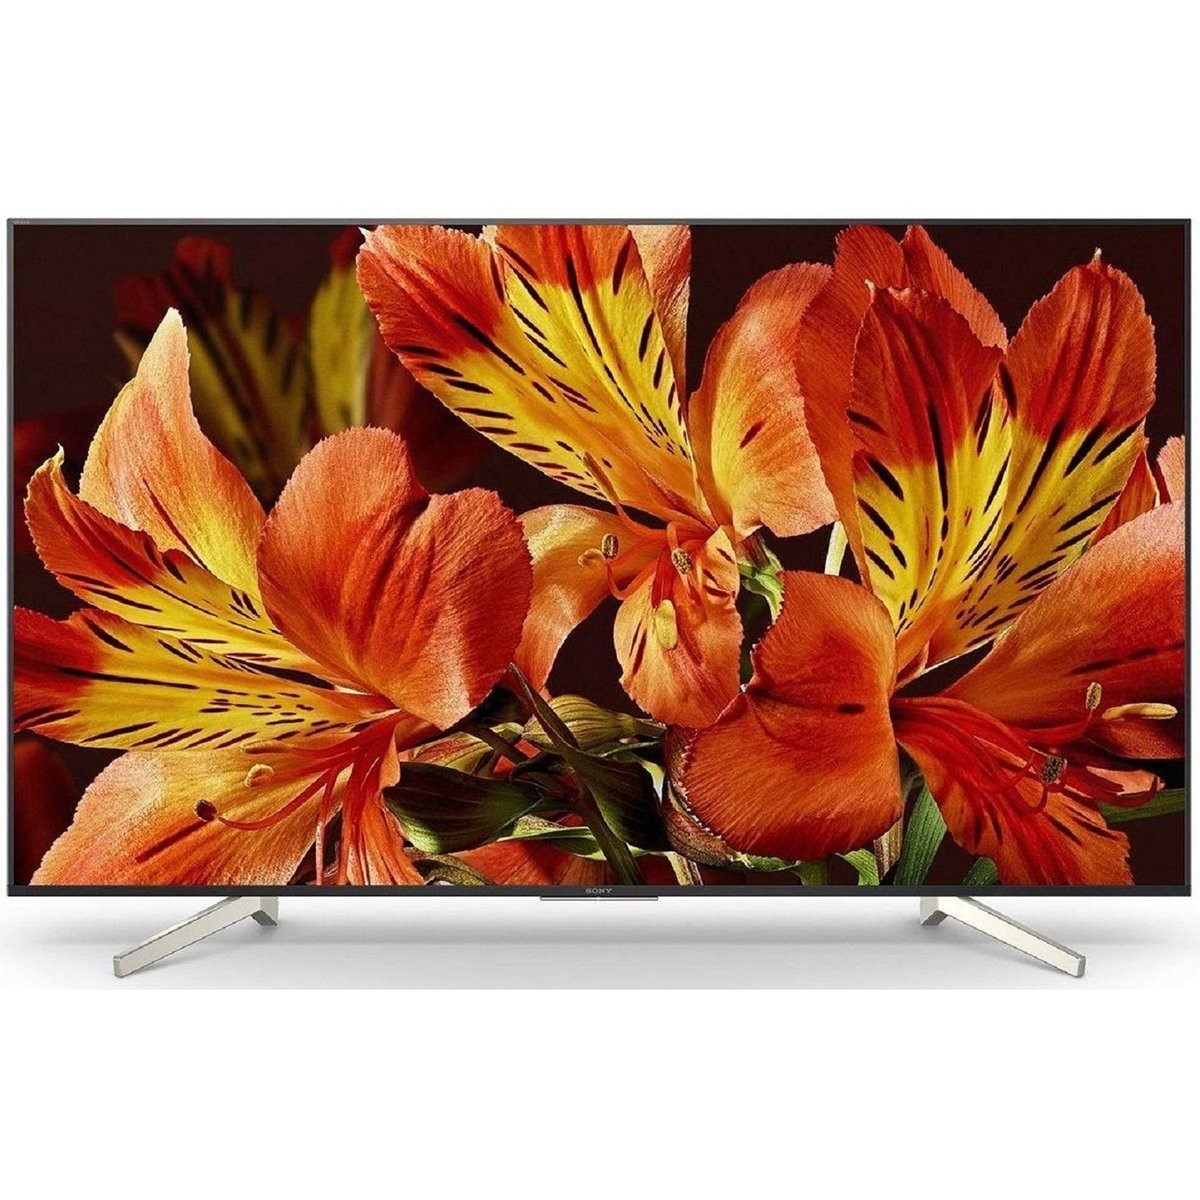 Sony 4K Ultra HD Android Smart LED TV KD-55X8500F 55inch